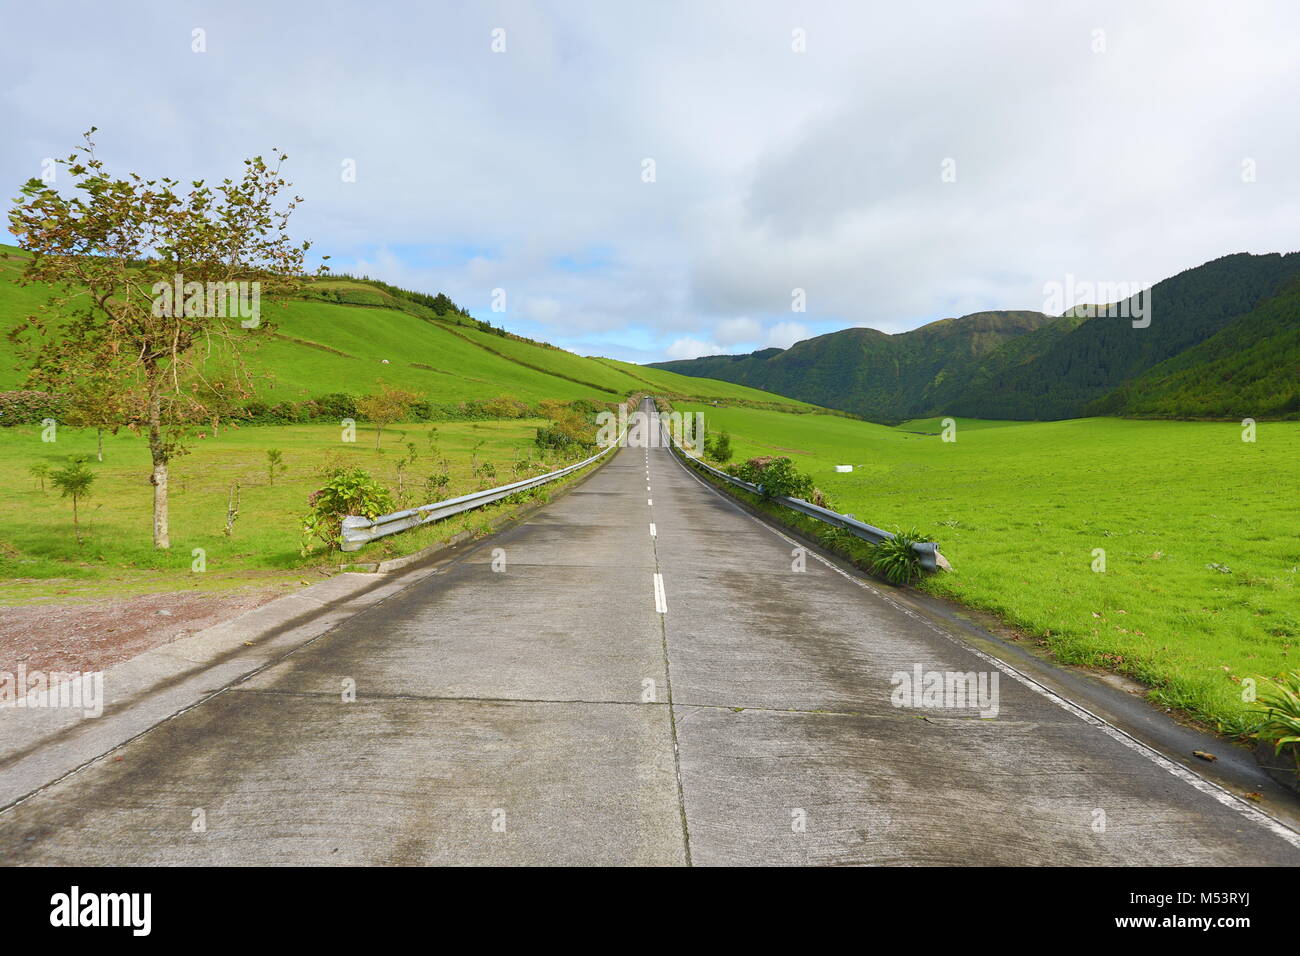 Empty roads in the countryside on the island of Saint Michael (Sao Miguel) in the Azores, Portugal Stock Photo